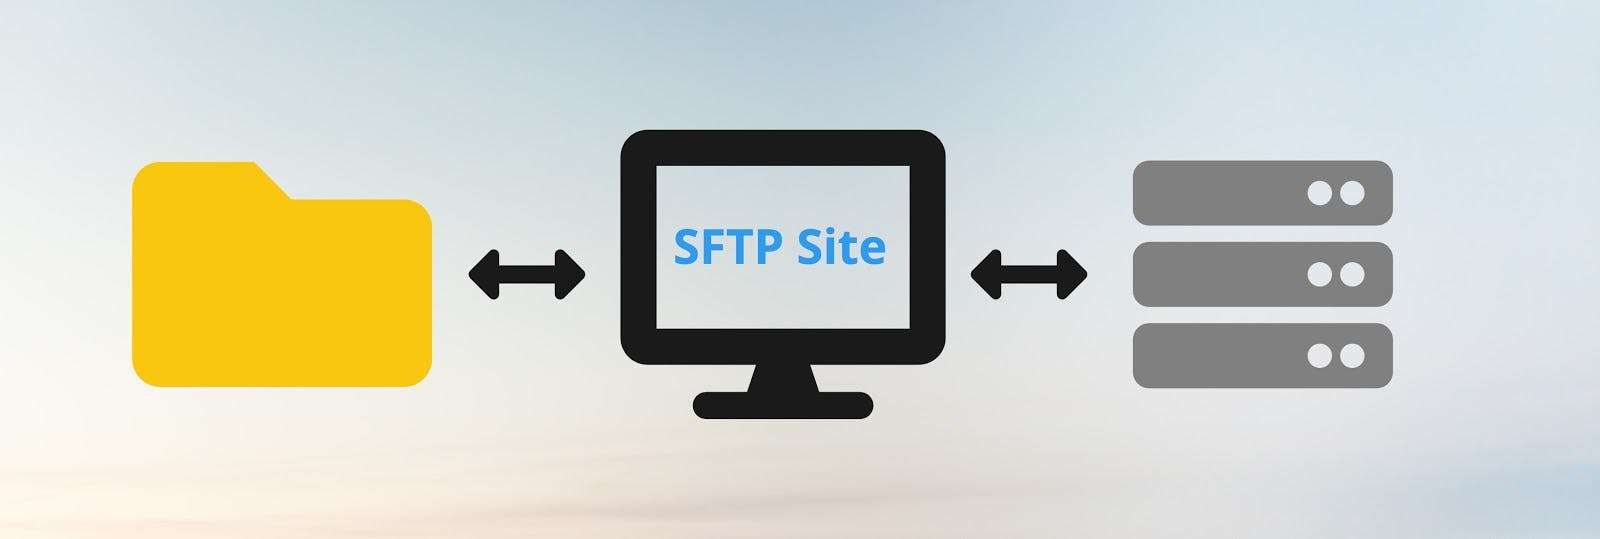 SFTP site transferring files between computer and server.